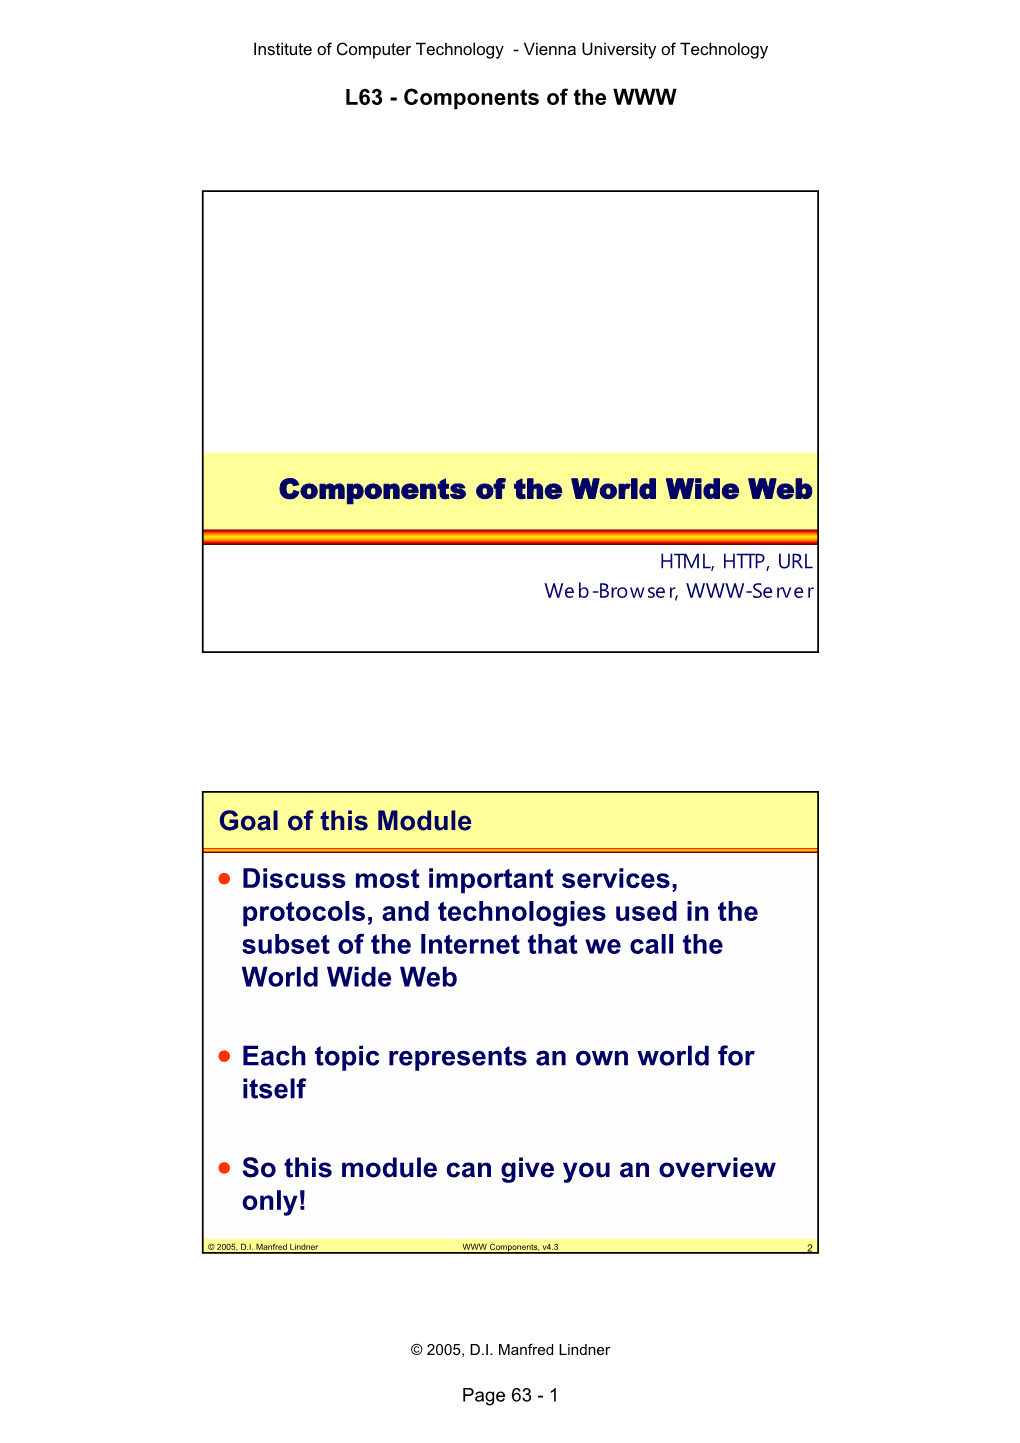 Components of the World Wide Web